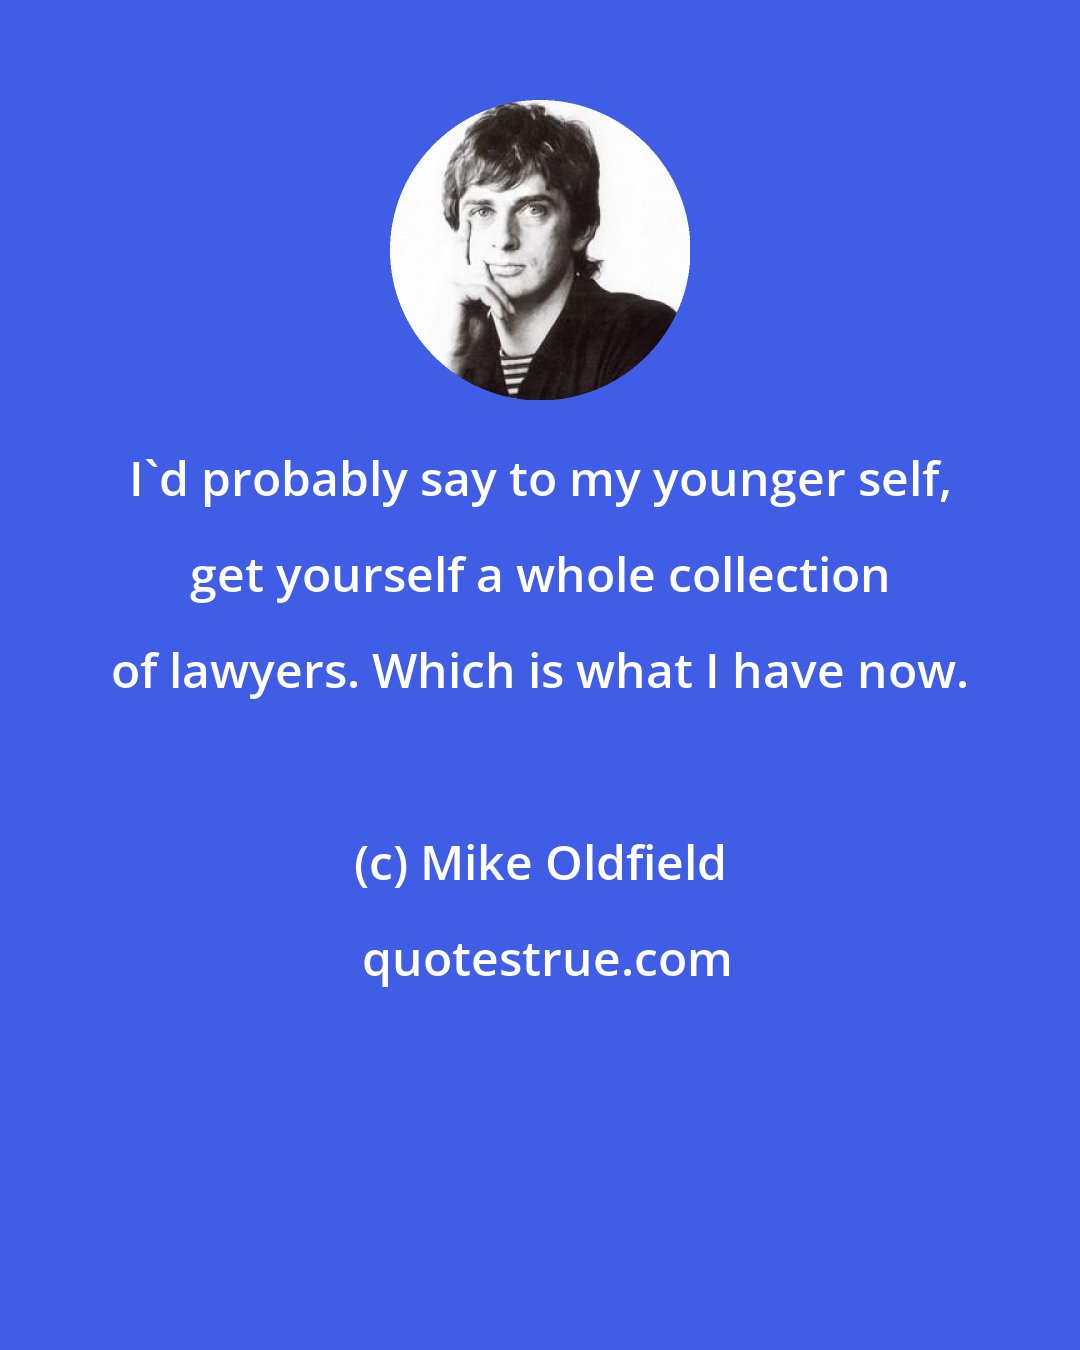 Mike Oldfield: I'd probably say to my younger self, get yourself a whole collection of lawyers. Which is what I have now.